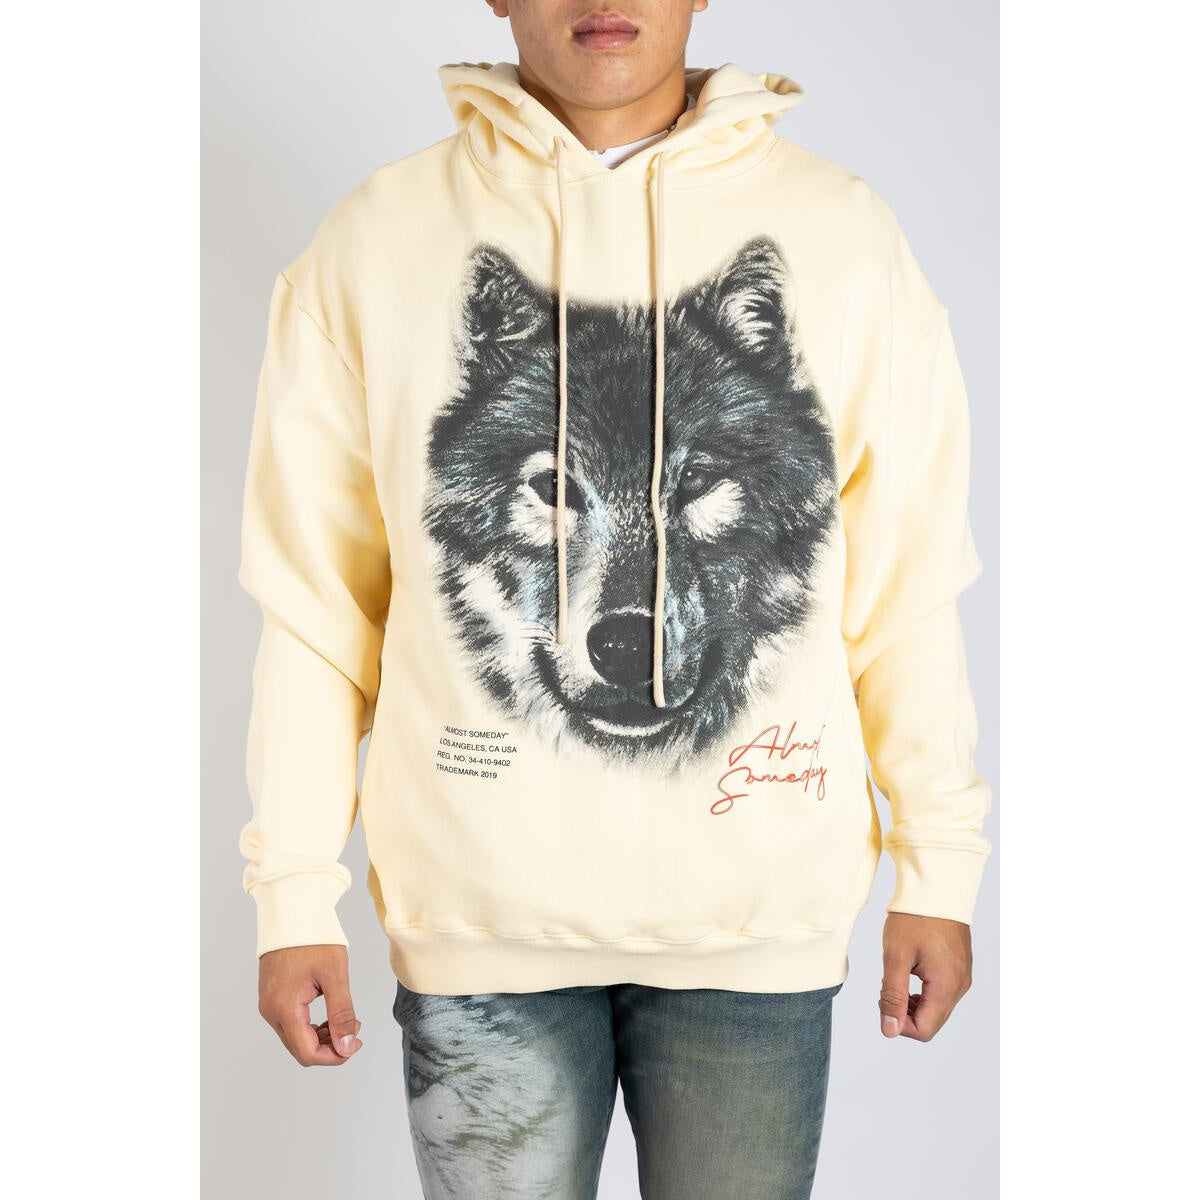 Almost Someday "Lone Wolf" Vintage White Hoodie